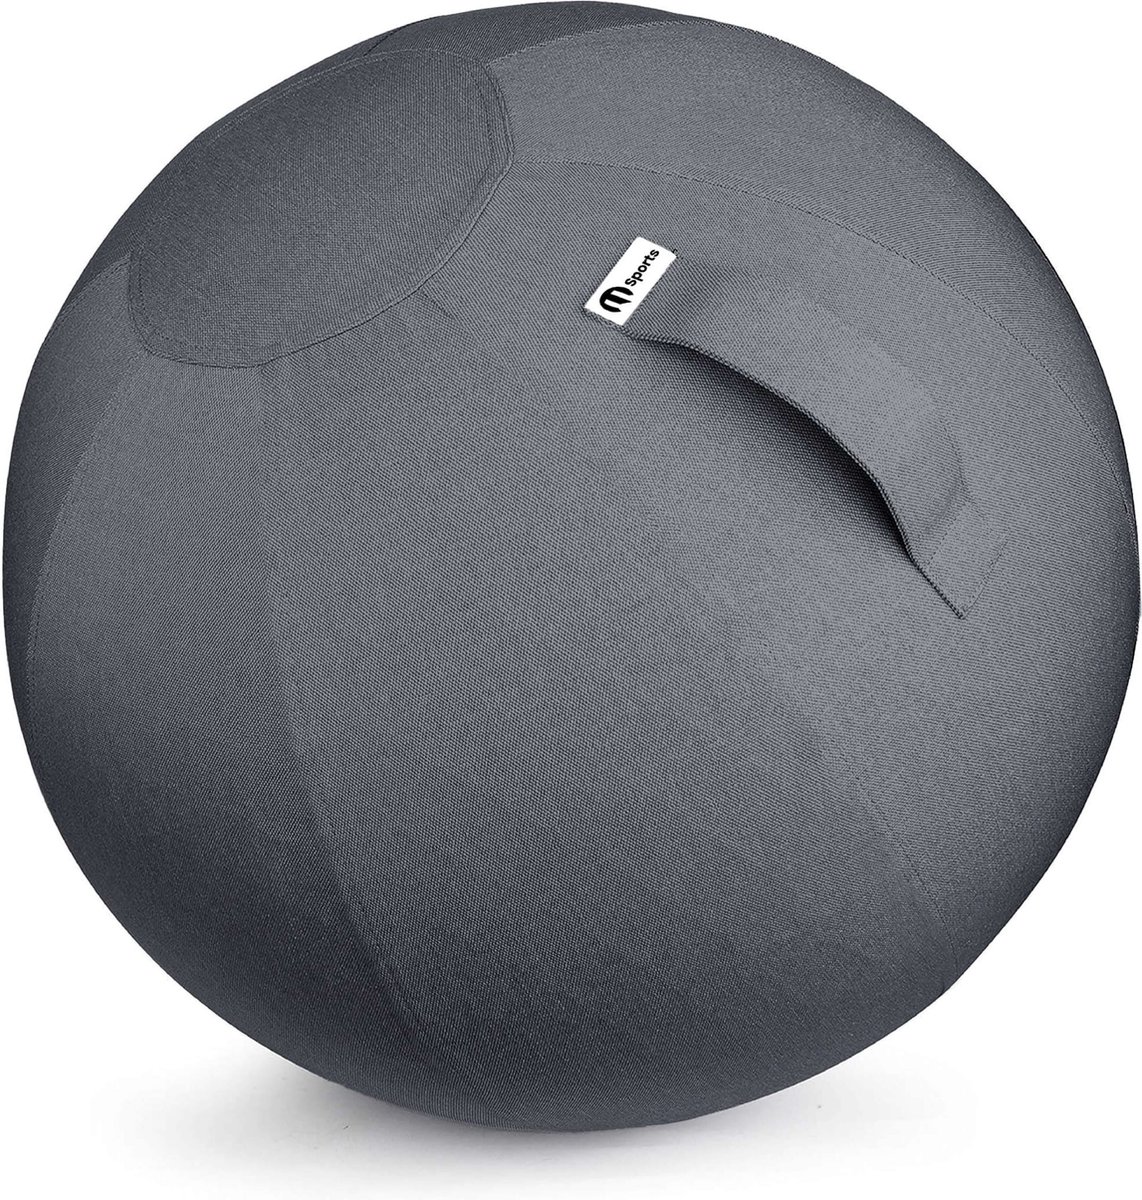 M sports - Fitness Yoga Bal Exercise Ball Gym Bal 65cm - incl wasbare hoes - incl pomp - Grijs